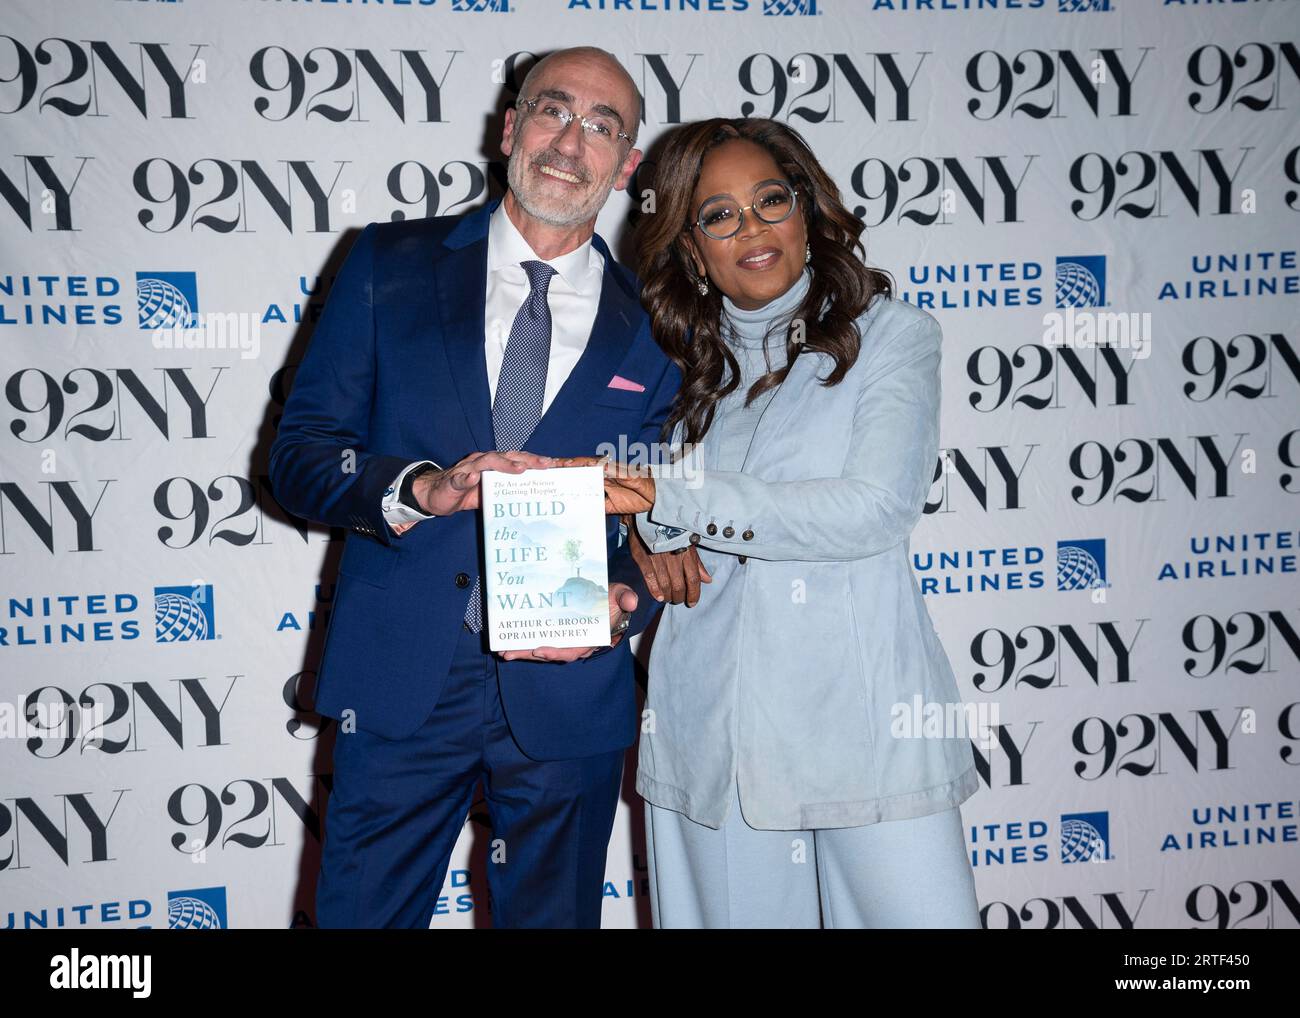 https://c8.alamy.com/comp/2RTF450/arthur-c-brooks-and-oprah-winfrey-pose-backstage-before-discussing-their-new-book-building-the-life-you-want-the-art-and-science-of-getting-happier-at-the-92nd-street-y-on-tuesday-sept-12-2023-in-new-york-photo-by-christopher-smithinvisionap-2RTF450.jpg